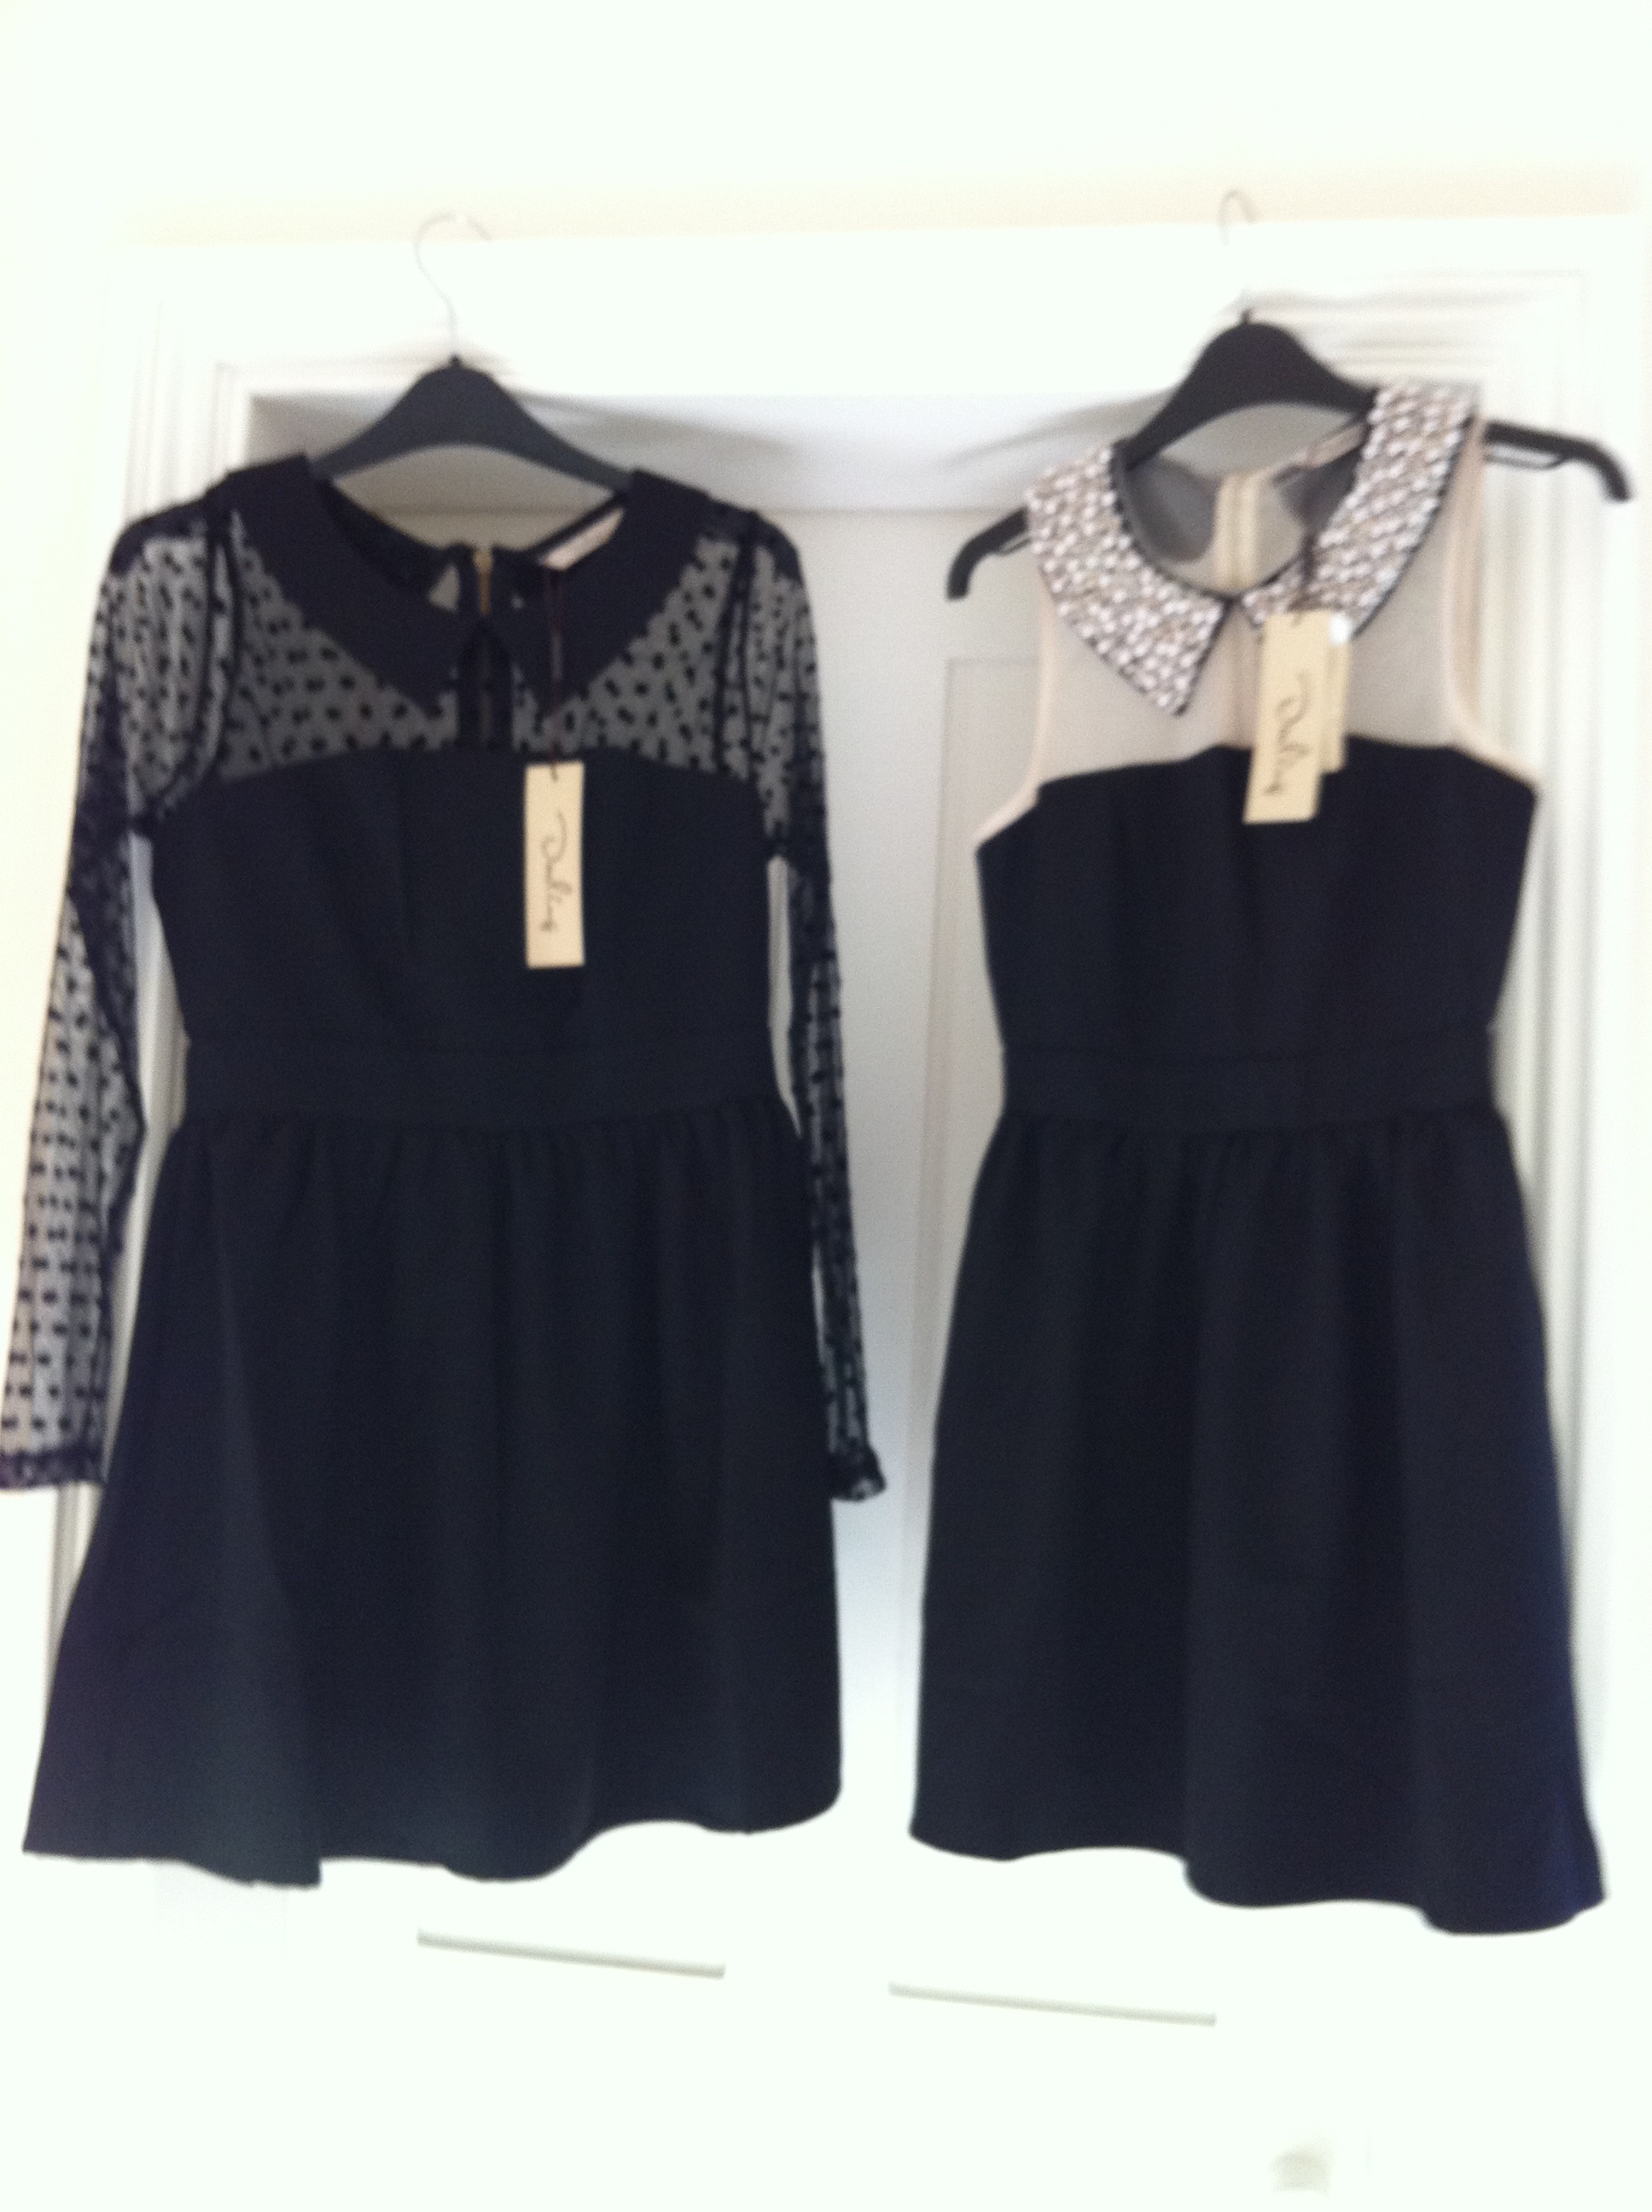 Gorgeous A/W Darling dresses